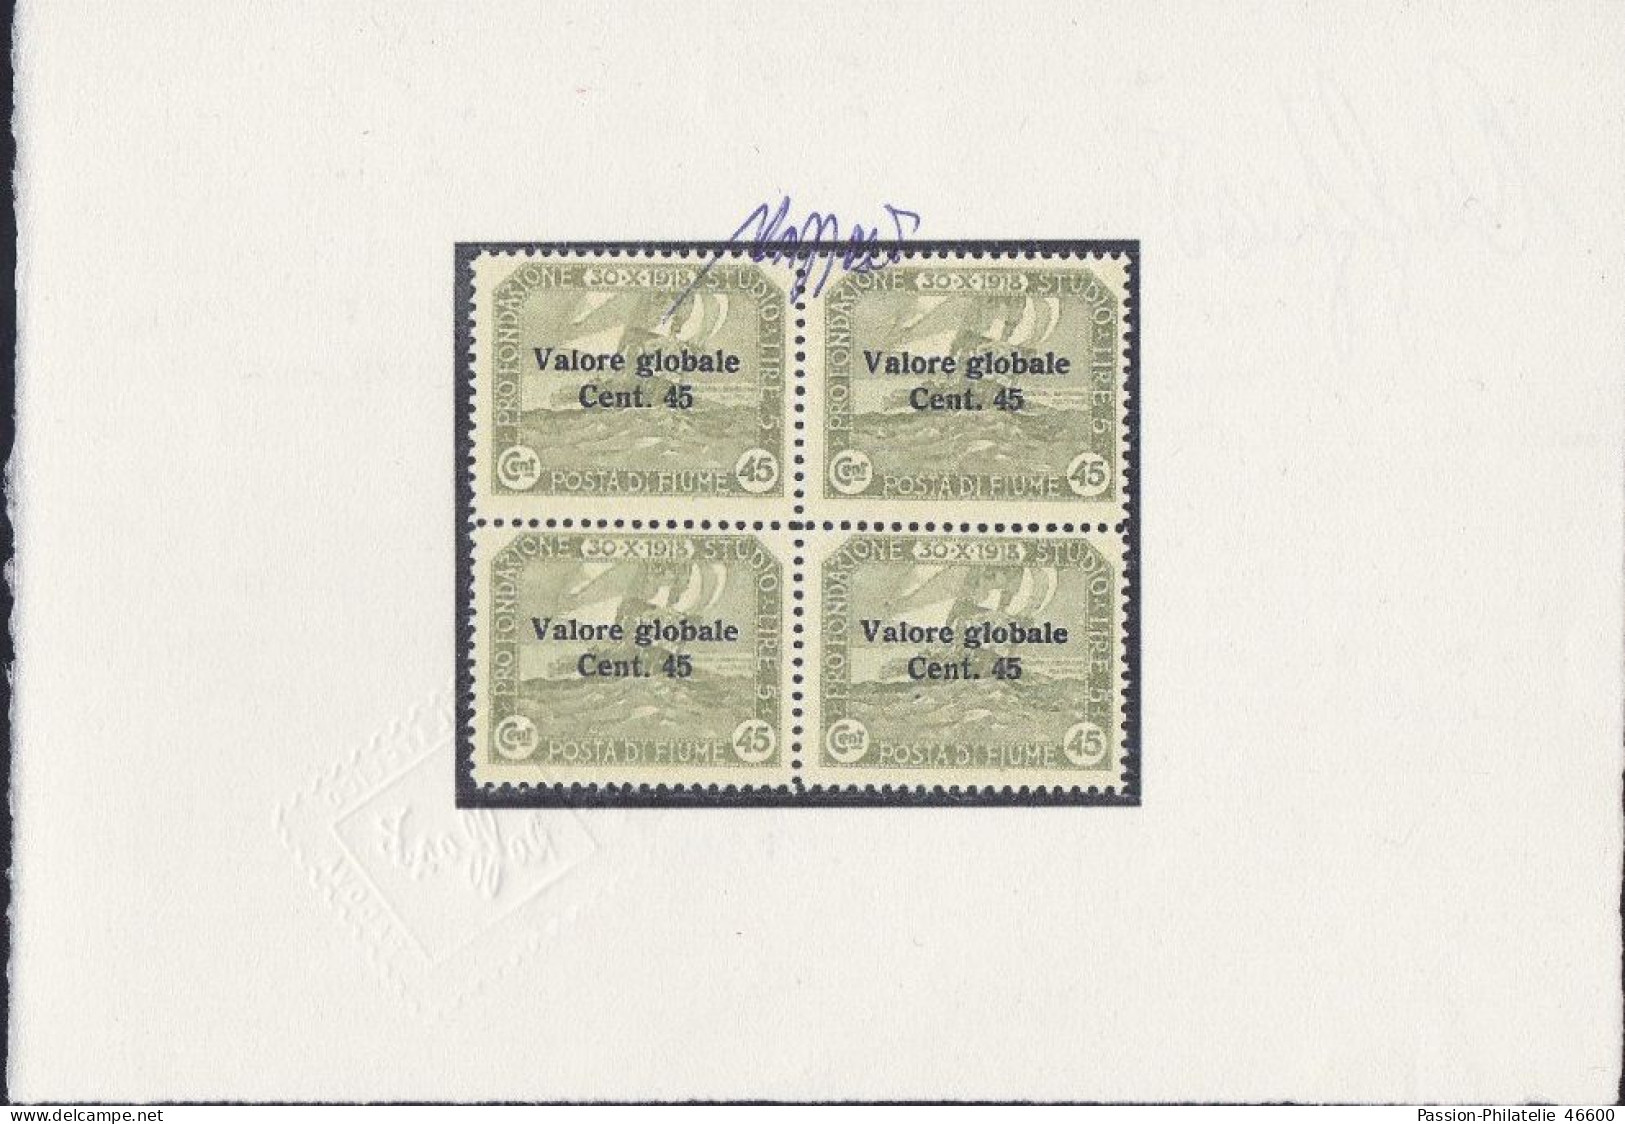 Fiume, Valore Globale, 45 Cent, Fat, Narrow Letters, Modificated Overprint, Sass. No.112, MNH Block Of Four, Certificat - Fiume